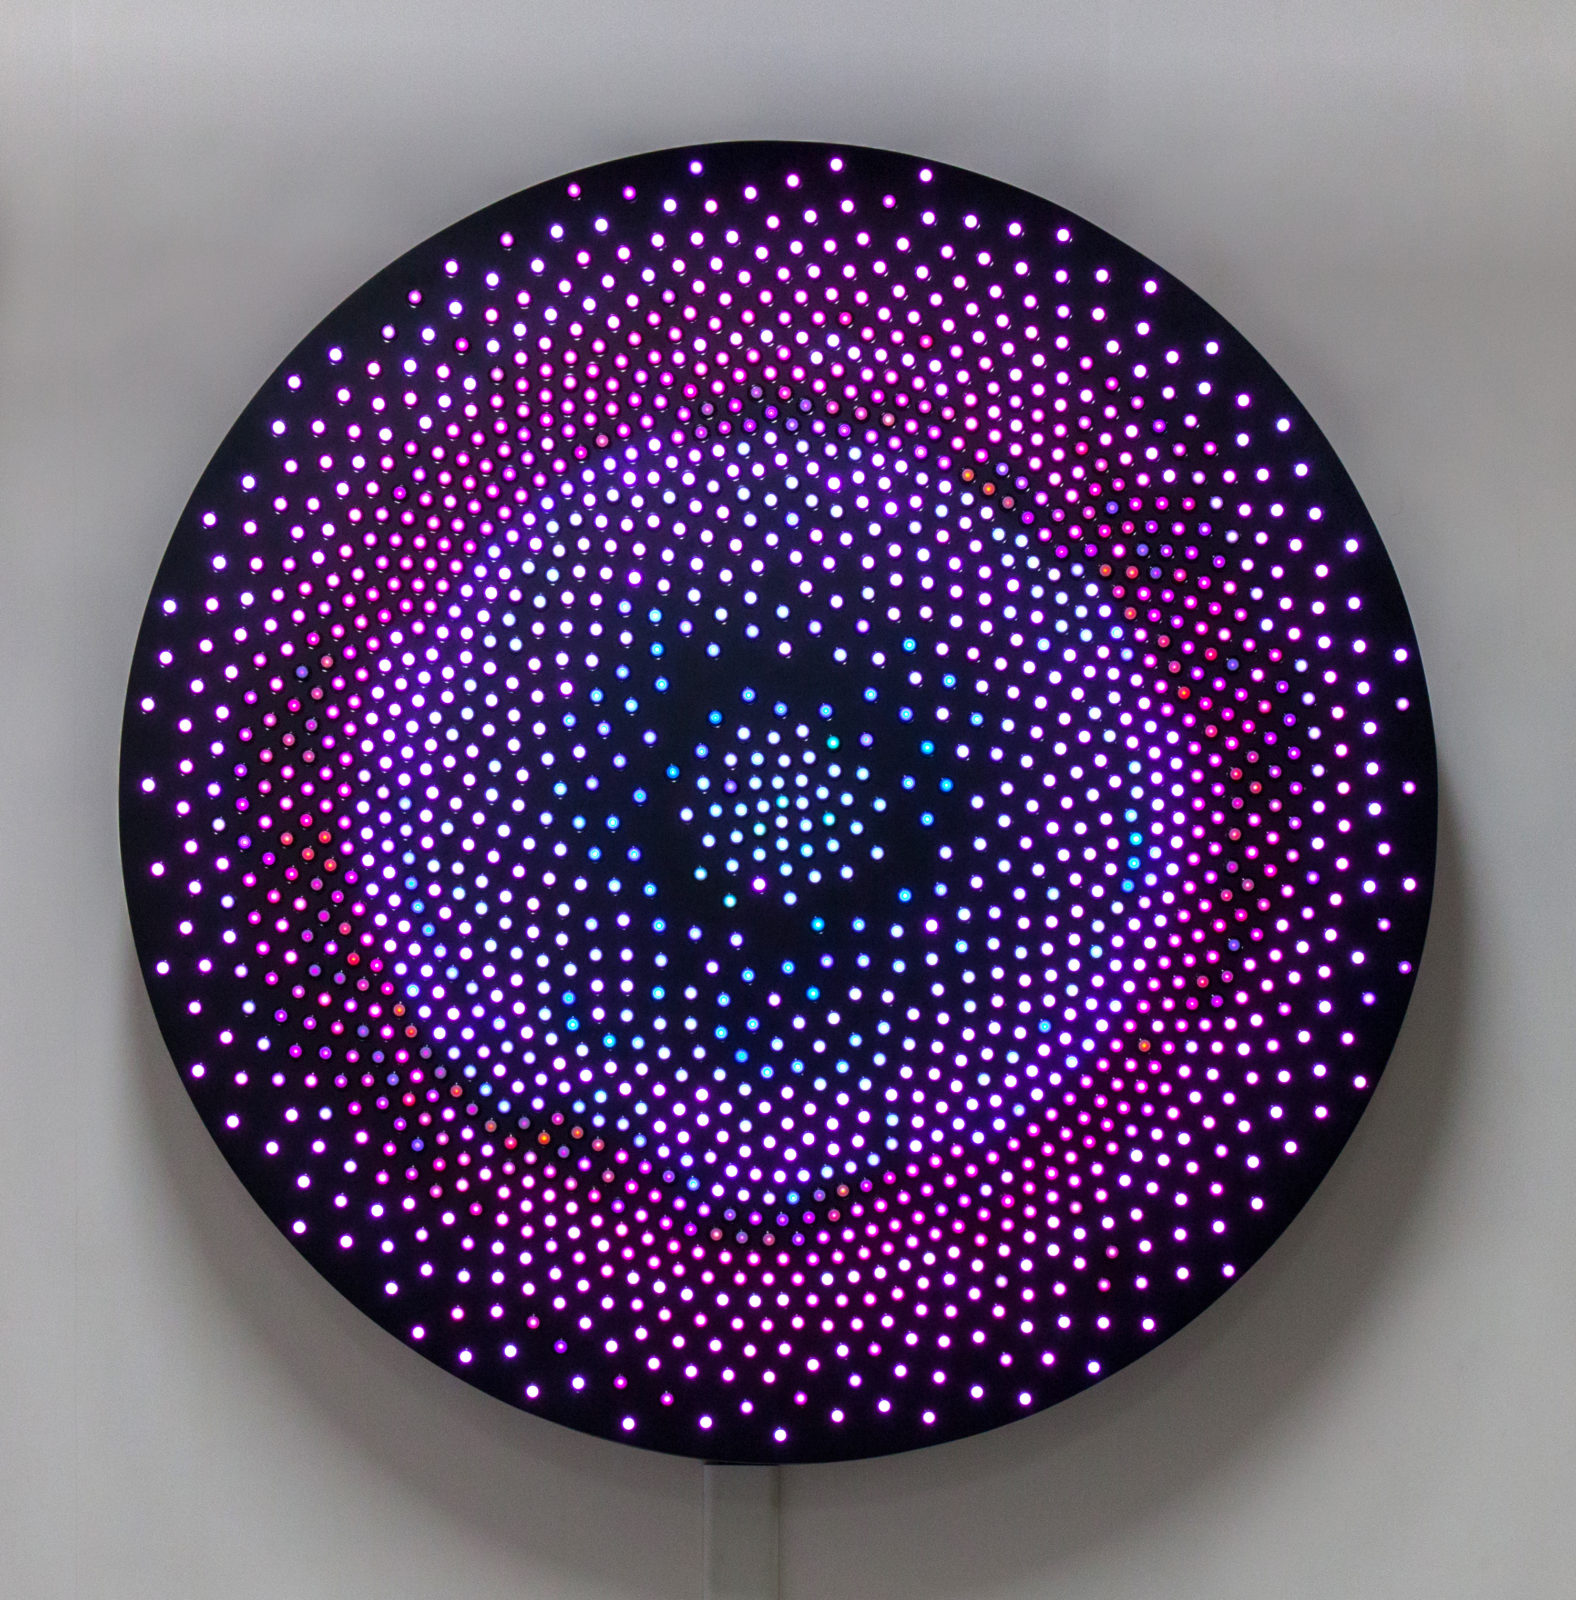 Big Bang uses 1,600 LEDs and a generative algorithm to produce a whirling constellation of light in an infinite pattern evoking planetary formation.